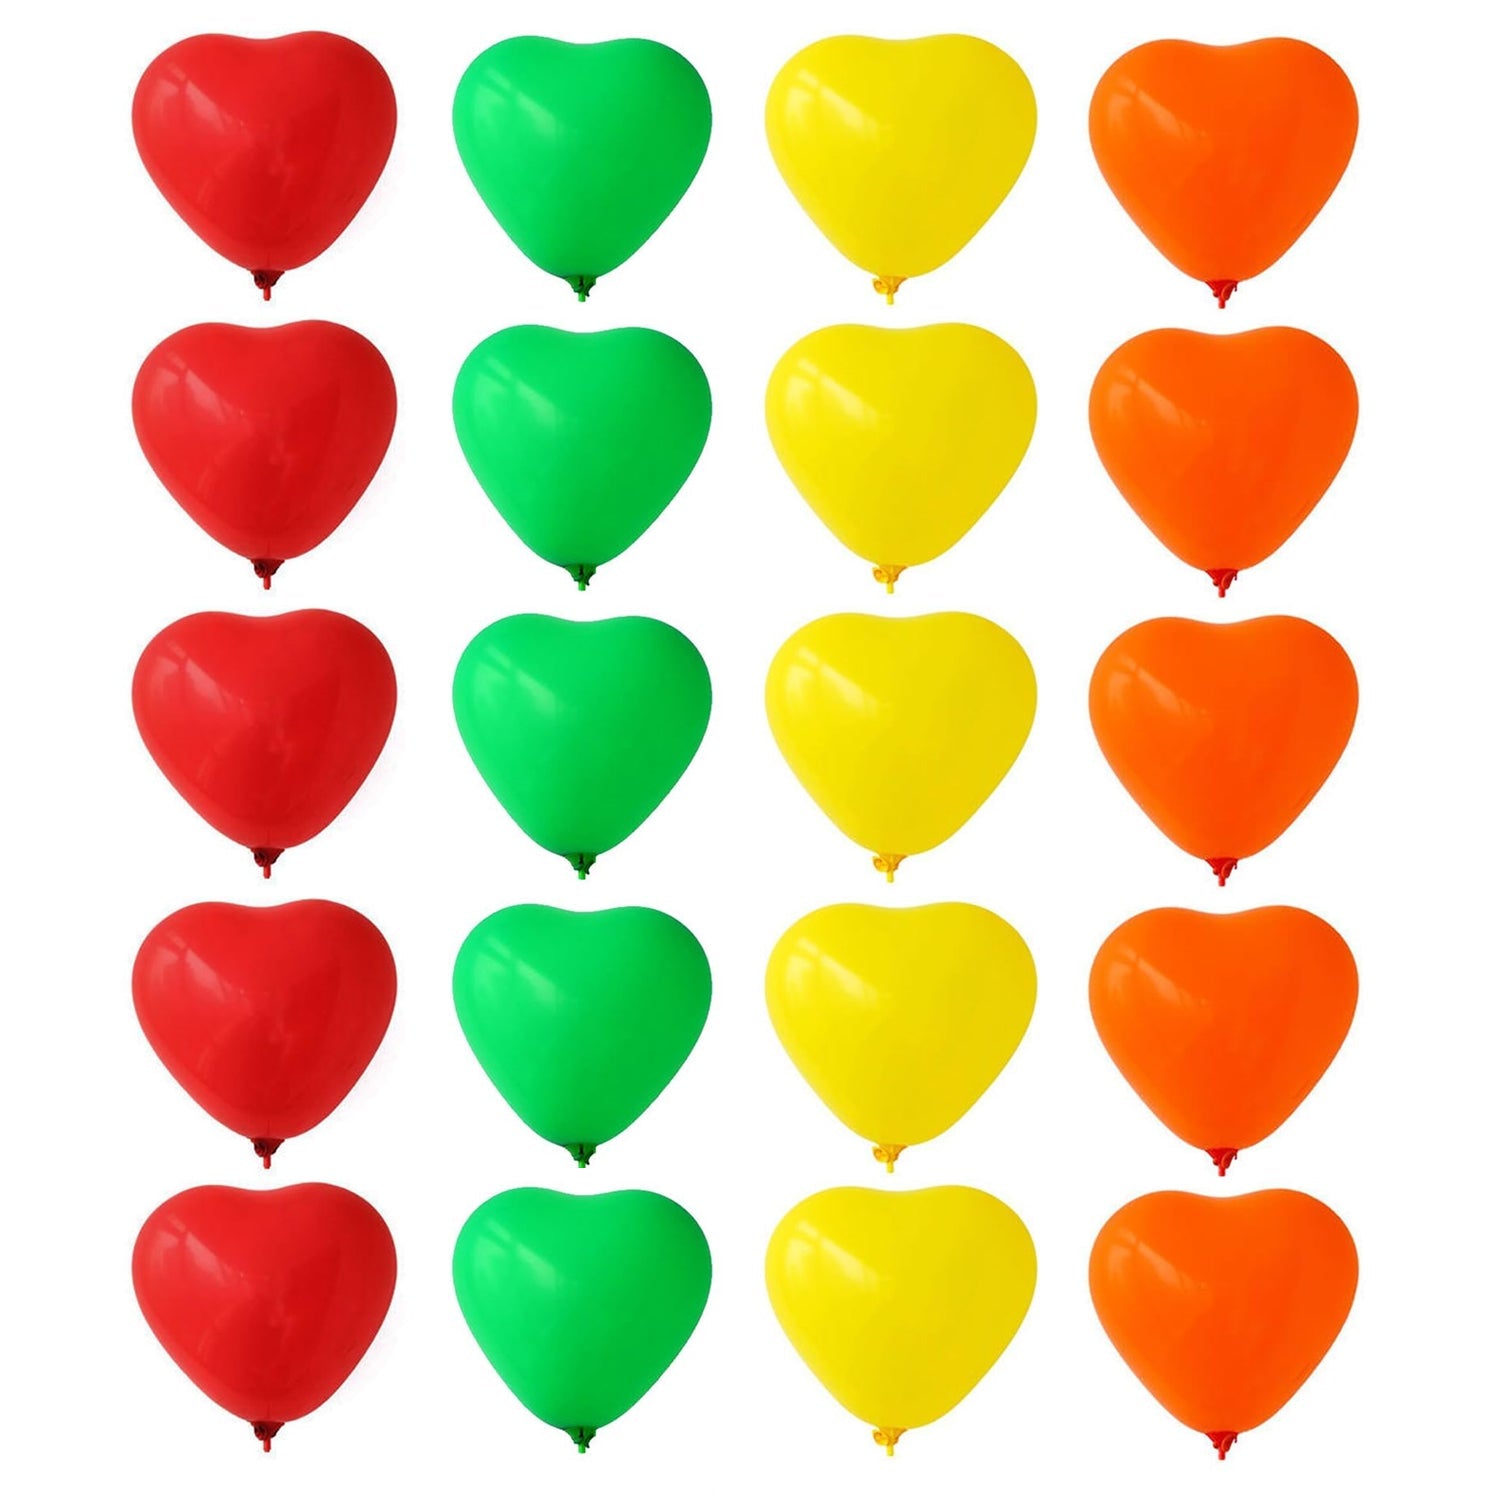 8891 Heart shaped balloons Kinds of Rainbow Party Latex Balloons for Birthday/Anniversary/Valentine's/Wedding/Engagement Party Decoration Multicolor (20 Pcs Set)